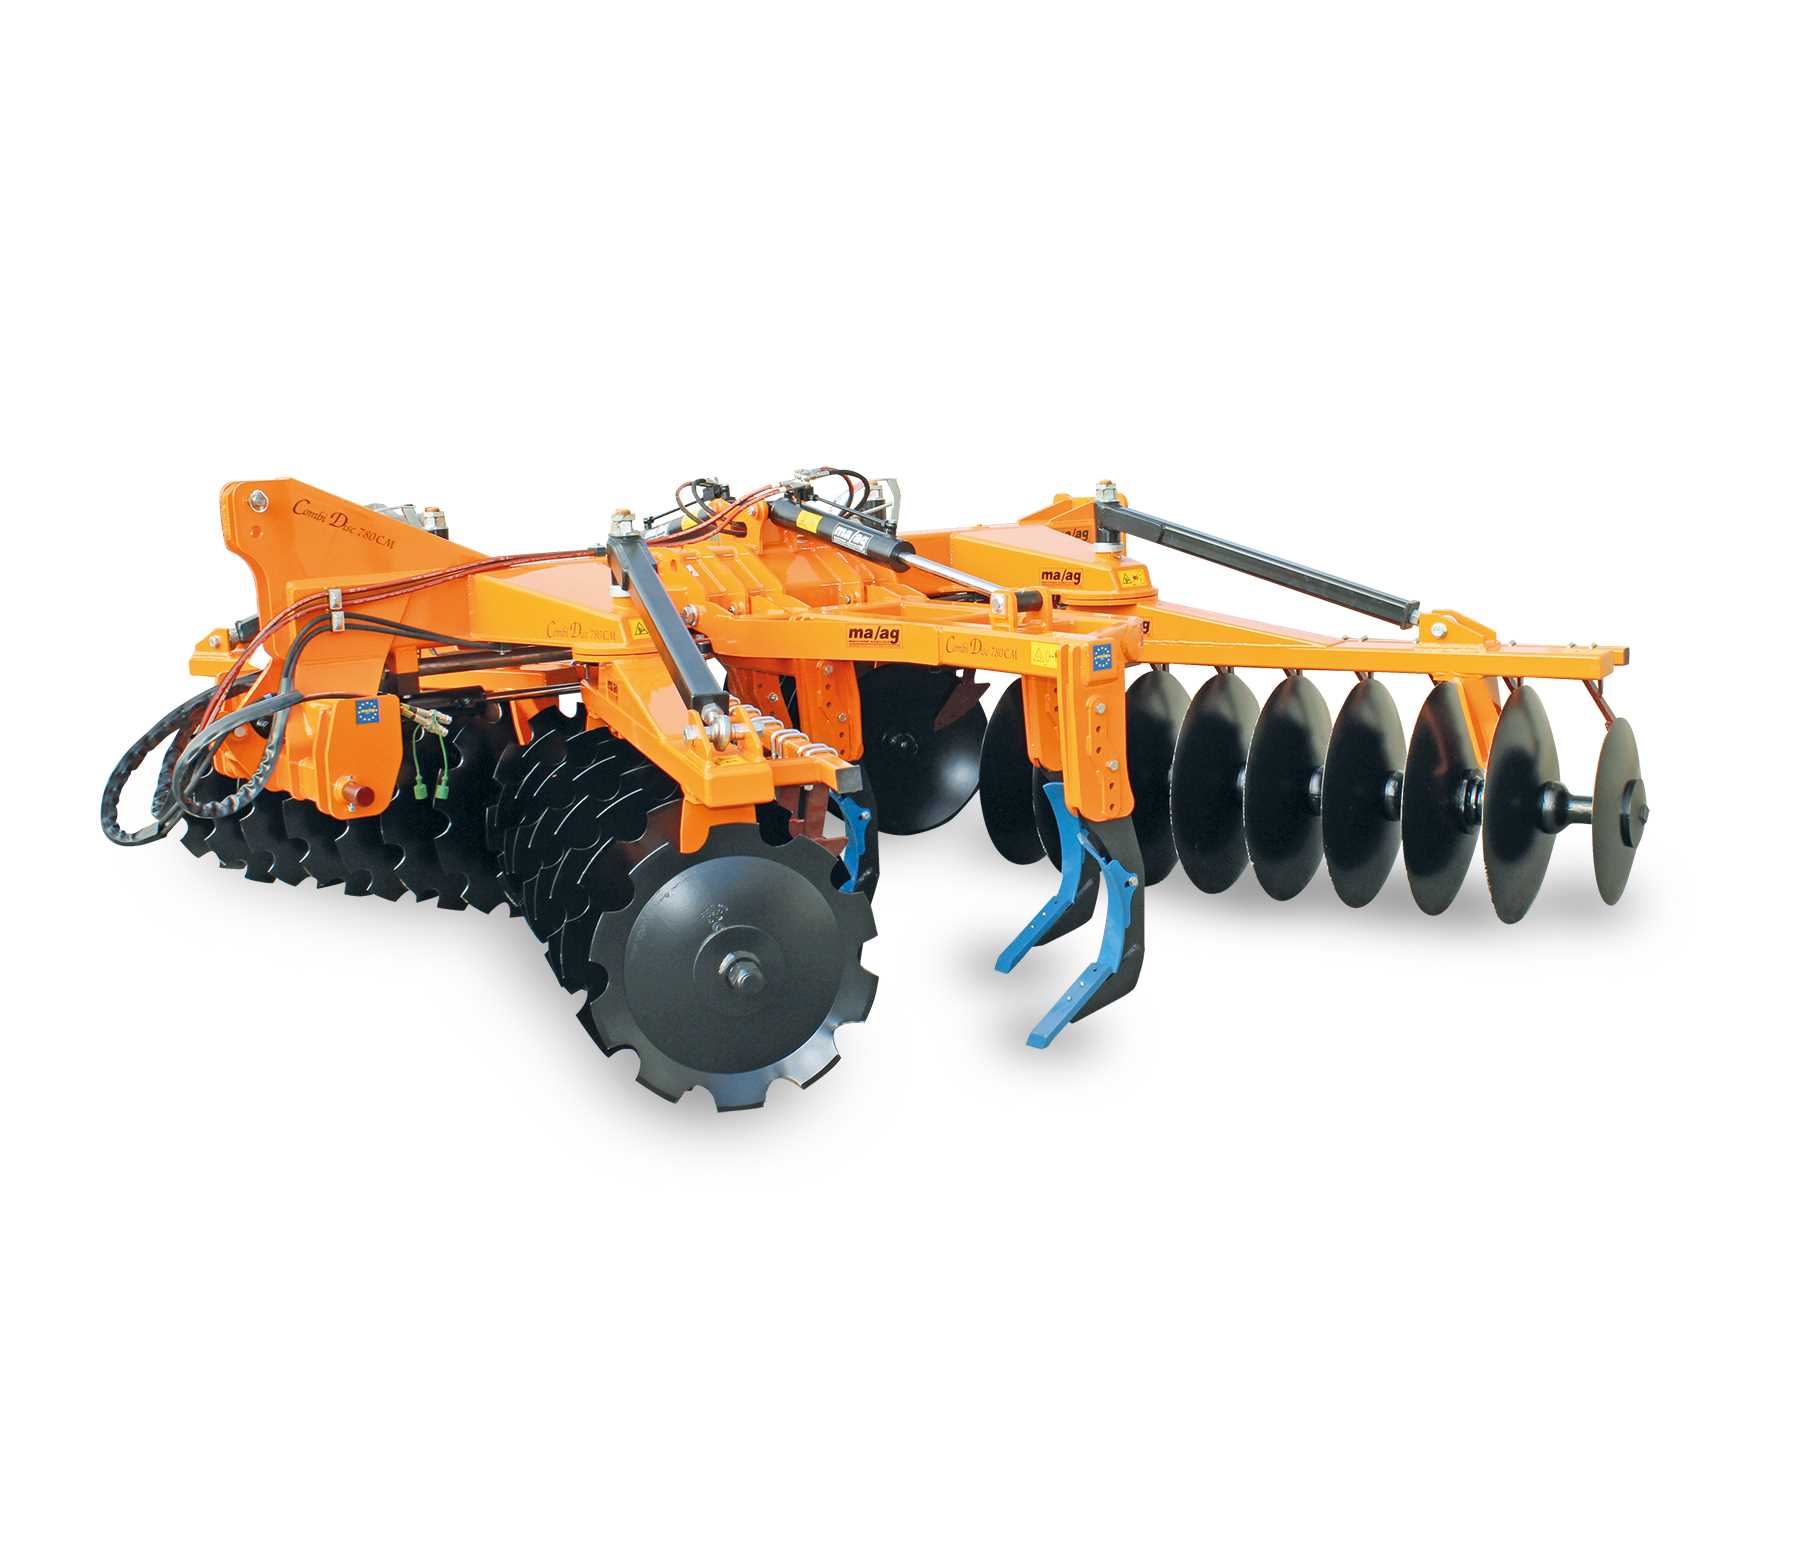 Disc harrows with “X” sections